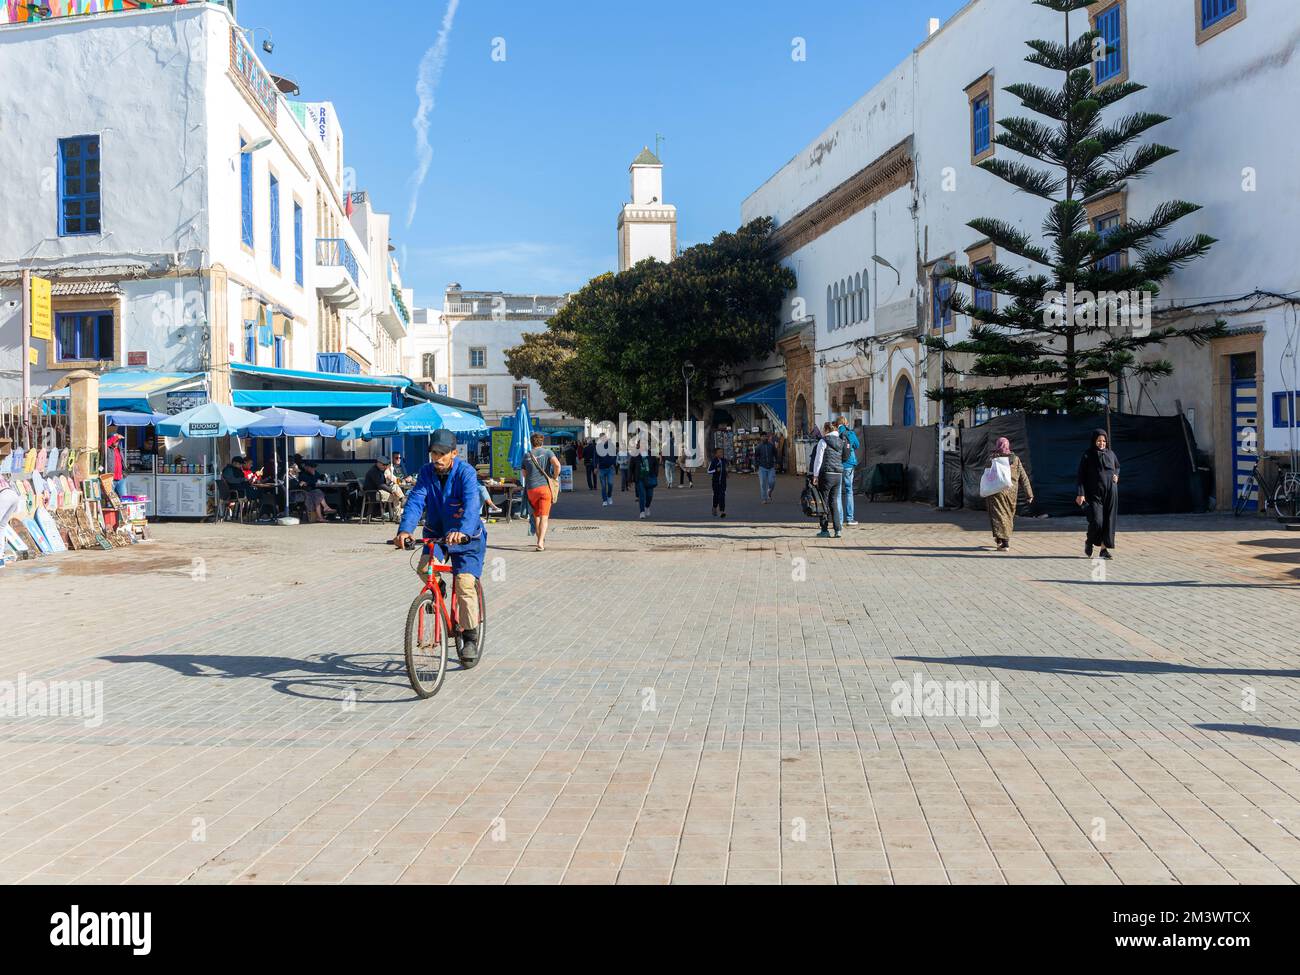 People walking man cycling, Place Moulay Hassan, Essaouira, Morocco, north Africa Stock Photo